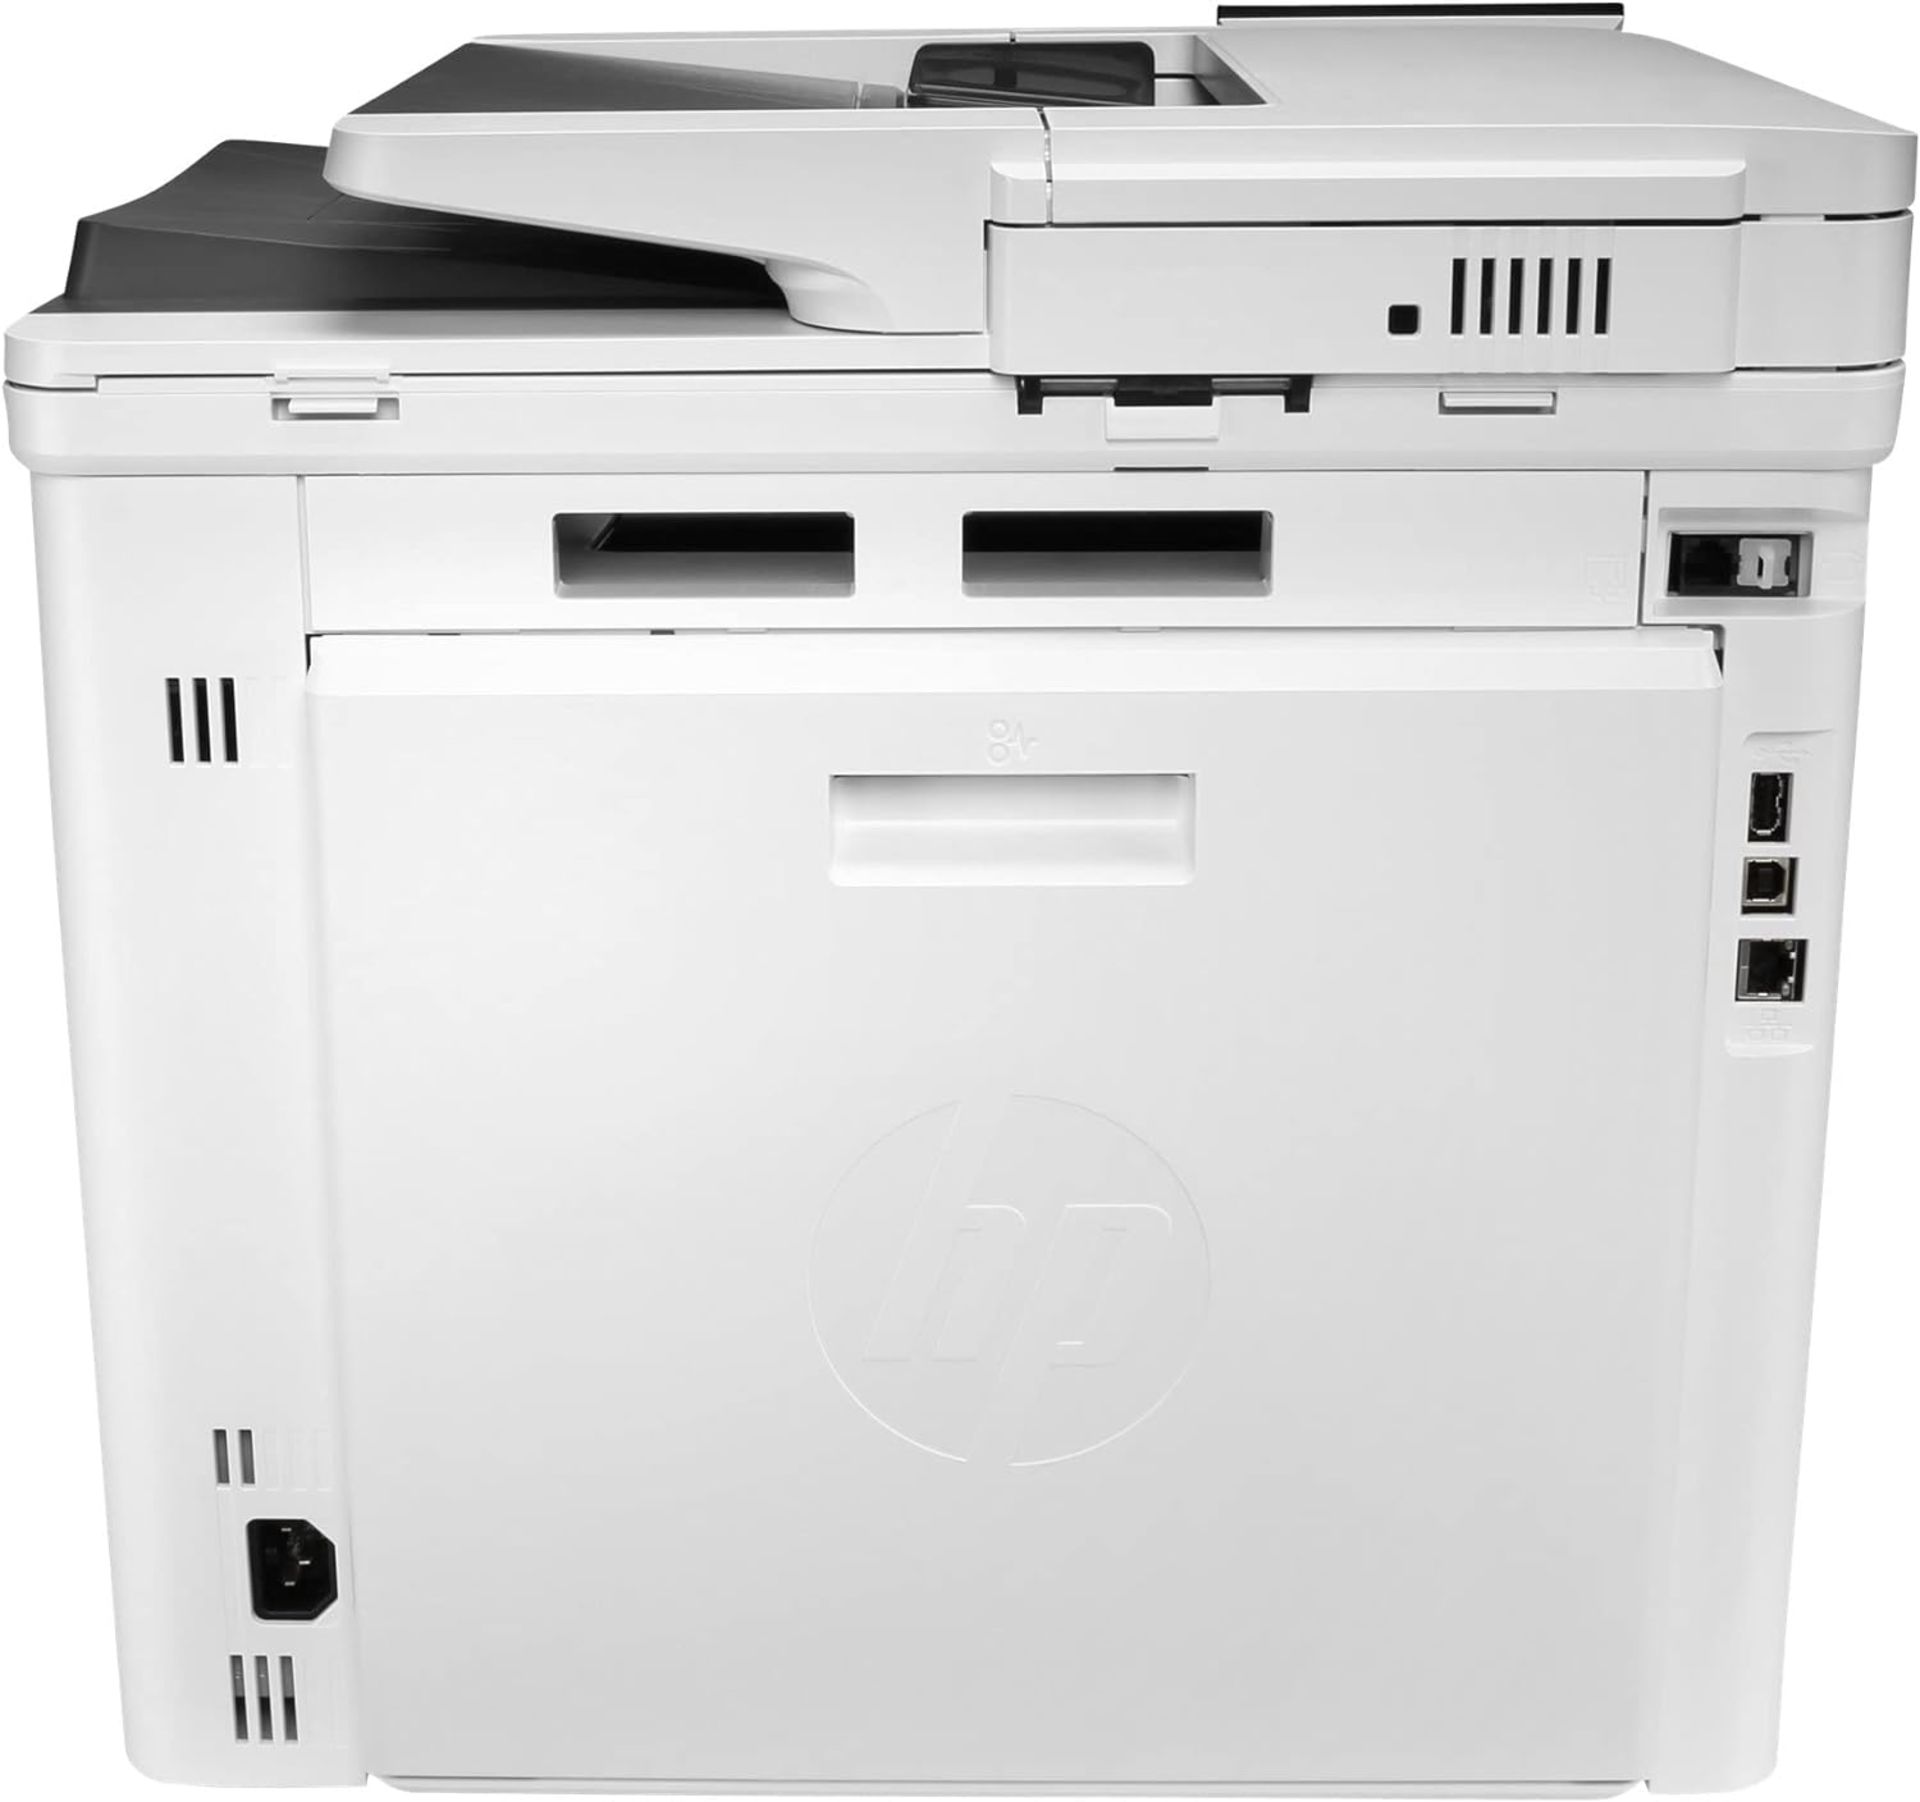 GRADE A HP Color LaserJet Enterprise MFP M480f. RRP £643. (PCK5). This printer is intended for use - Image 4 of 5